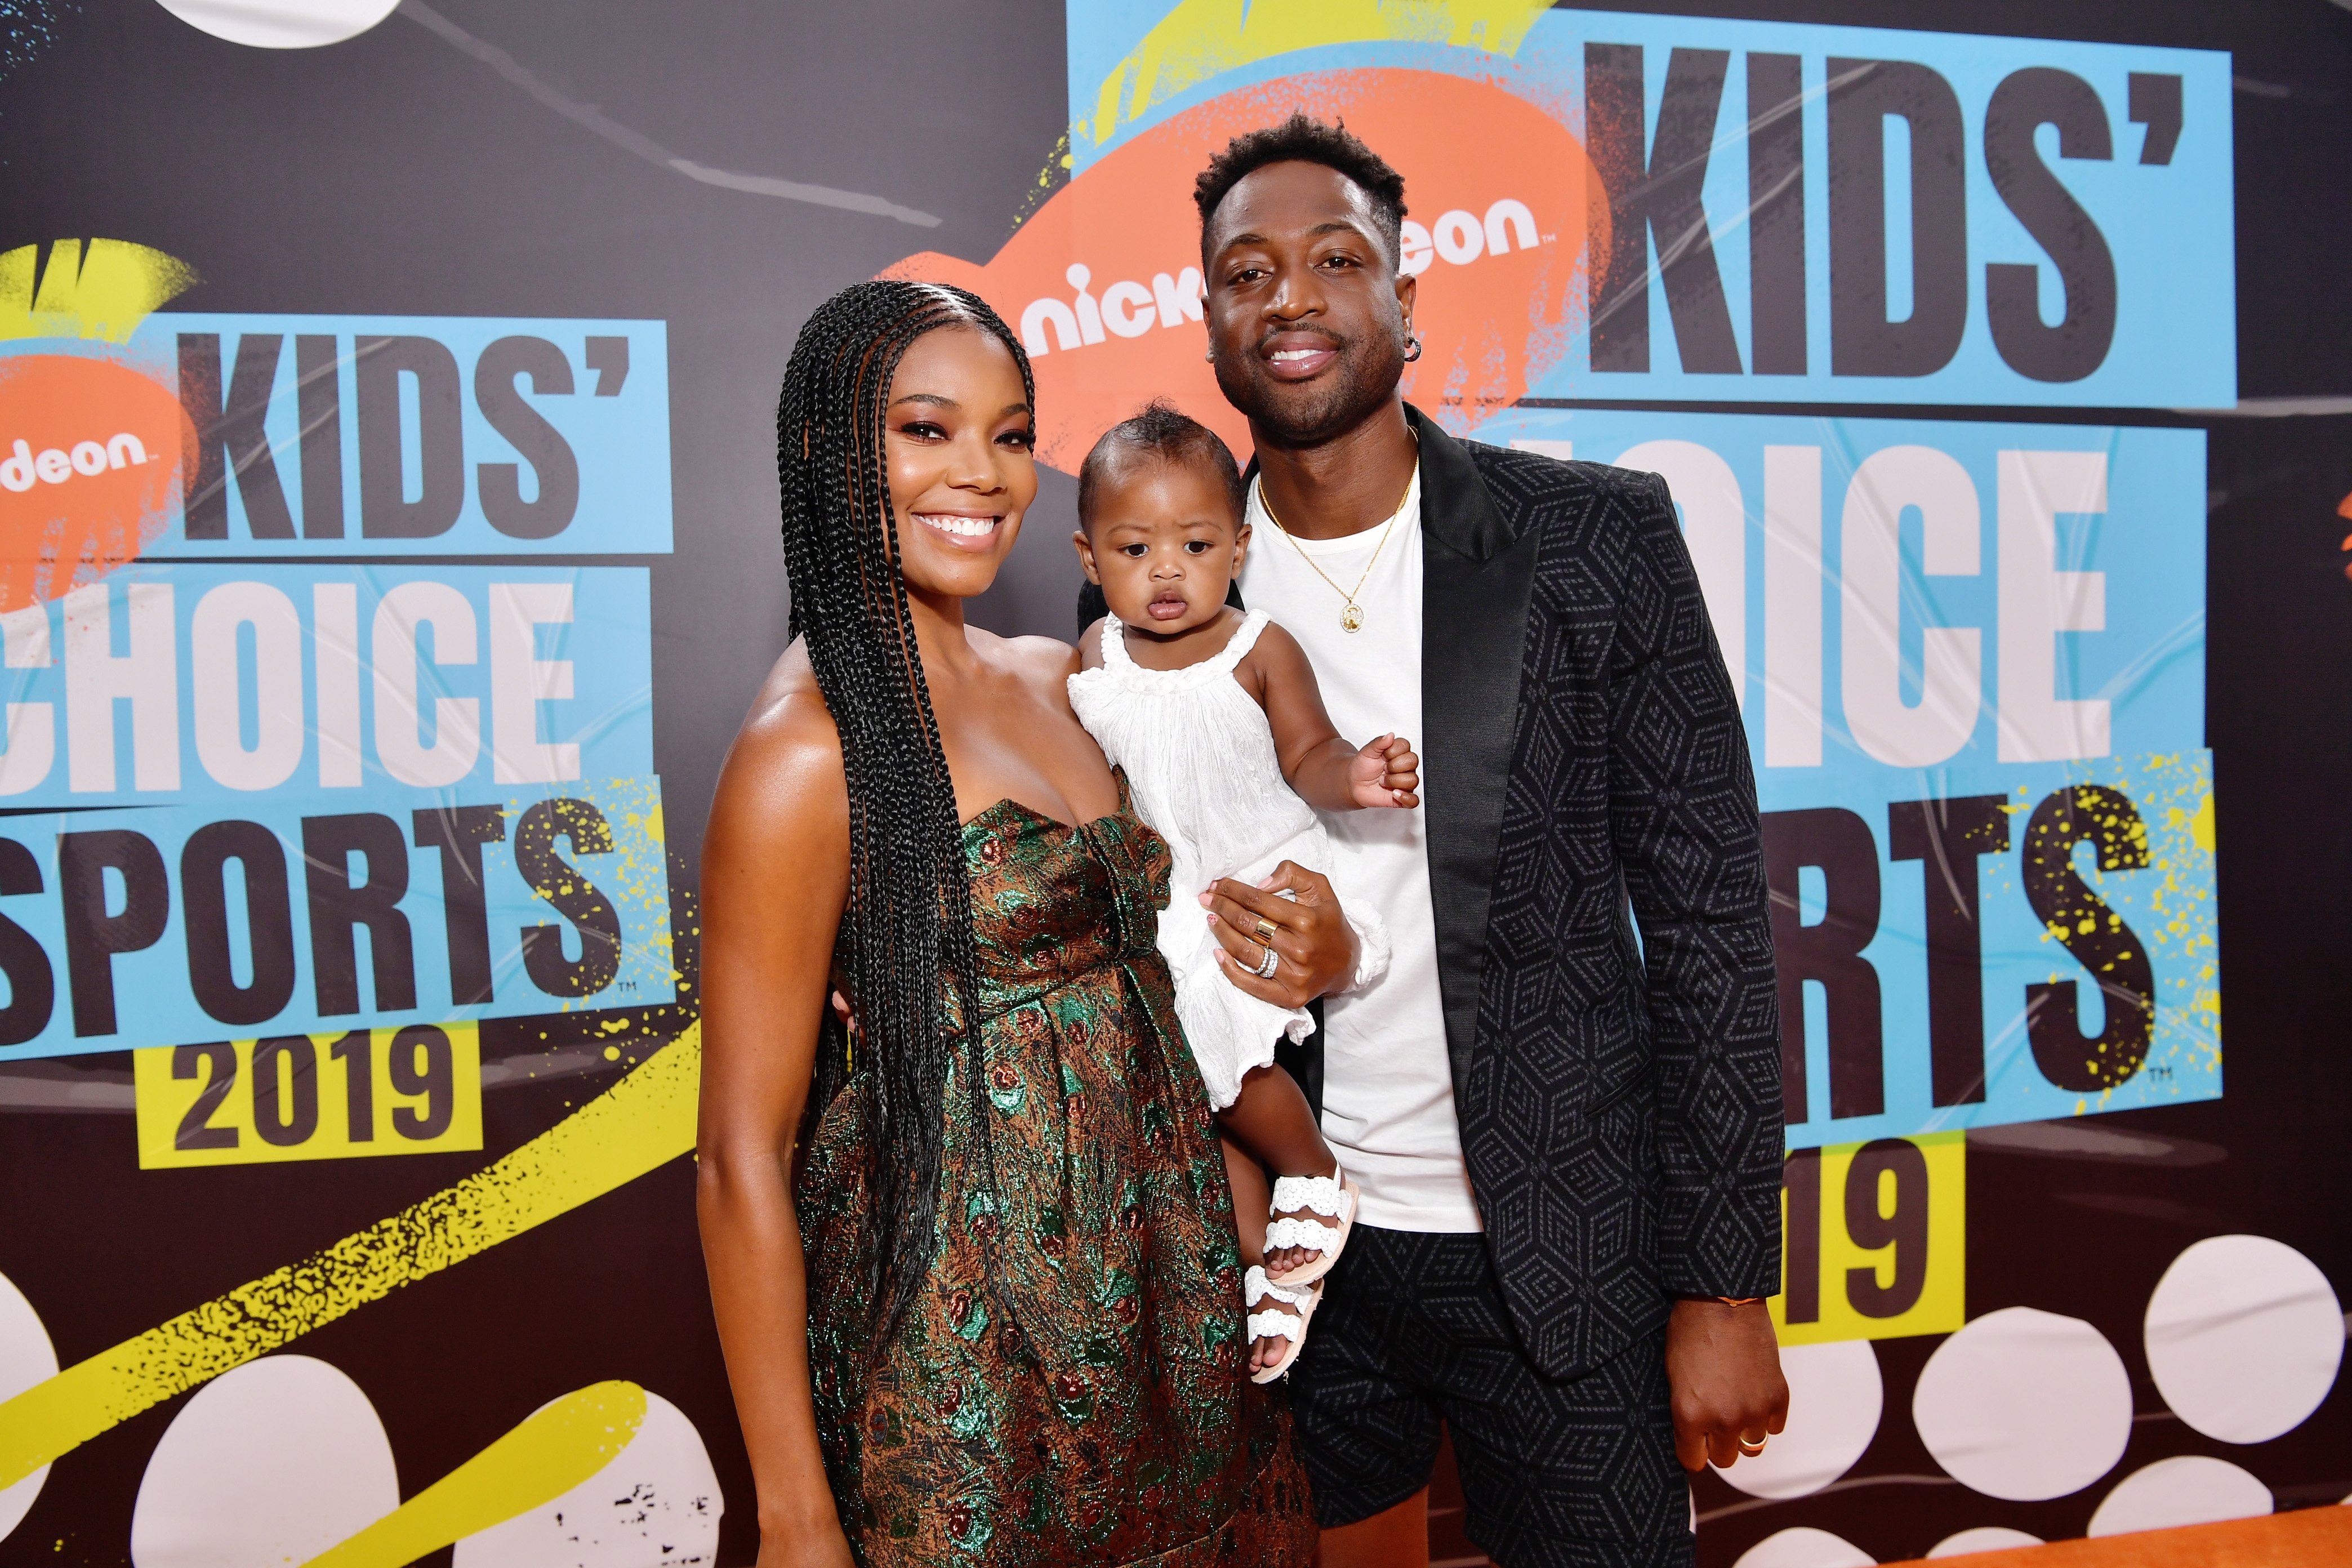 Gabrielle Union and Dwyane Wade with their daughter, Kaavia James attending Nickelodeon KIds' Choice Sports 2019. | Photo: Getty Images